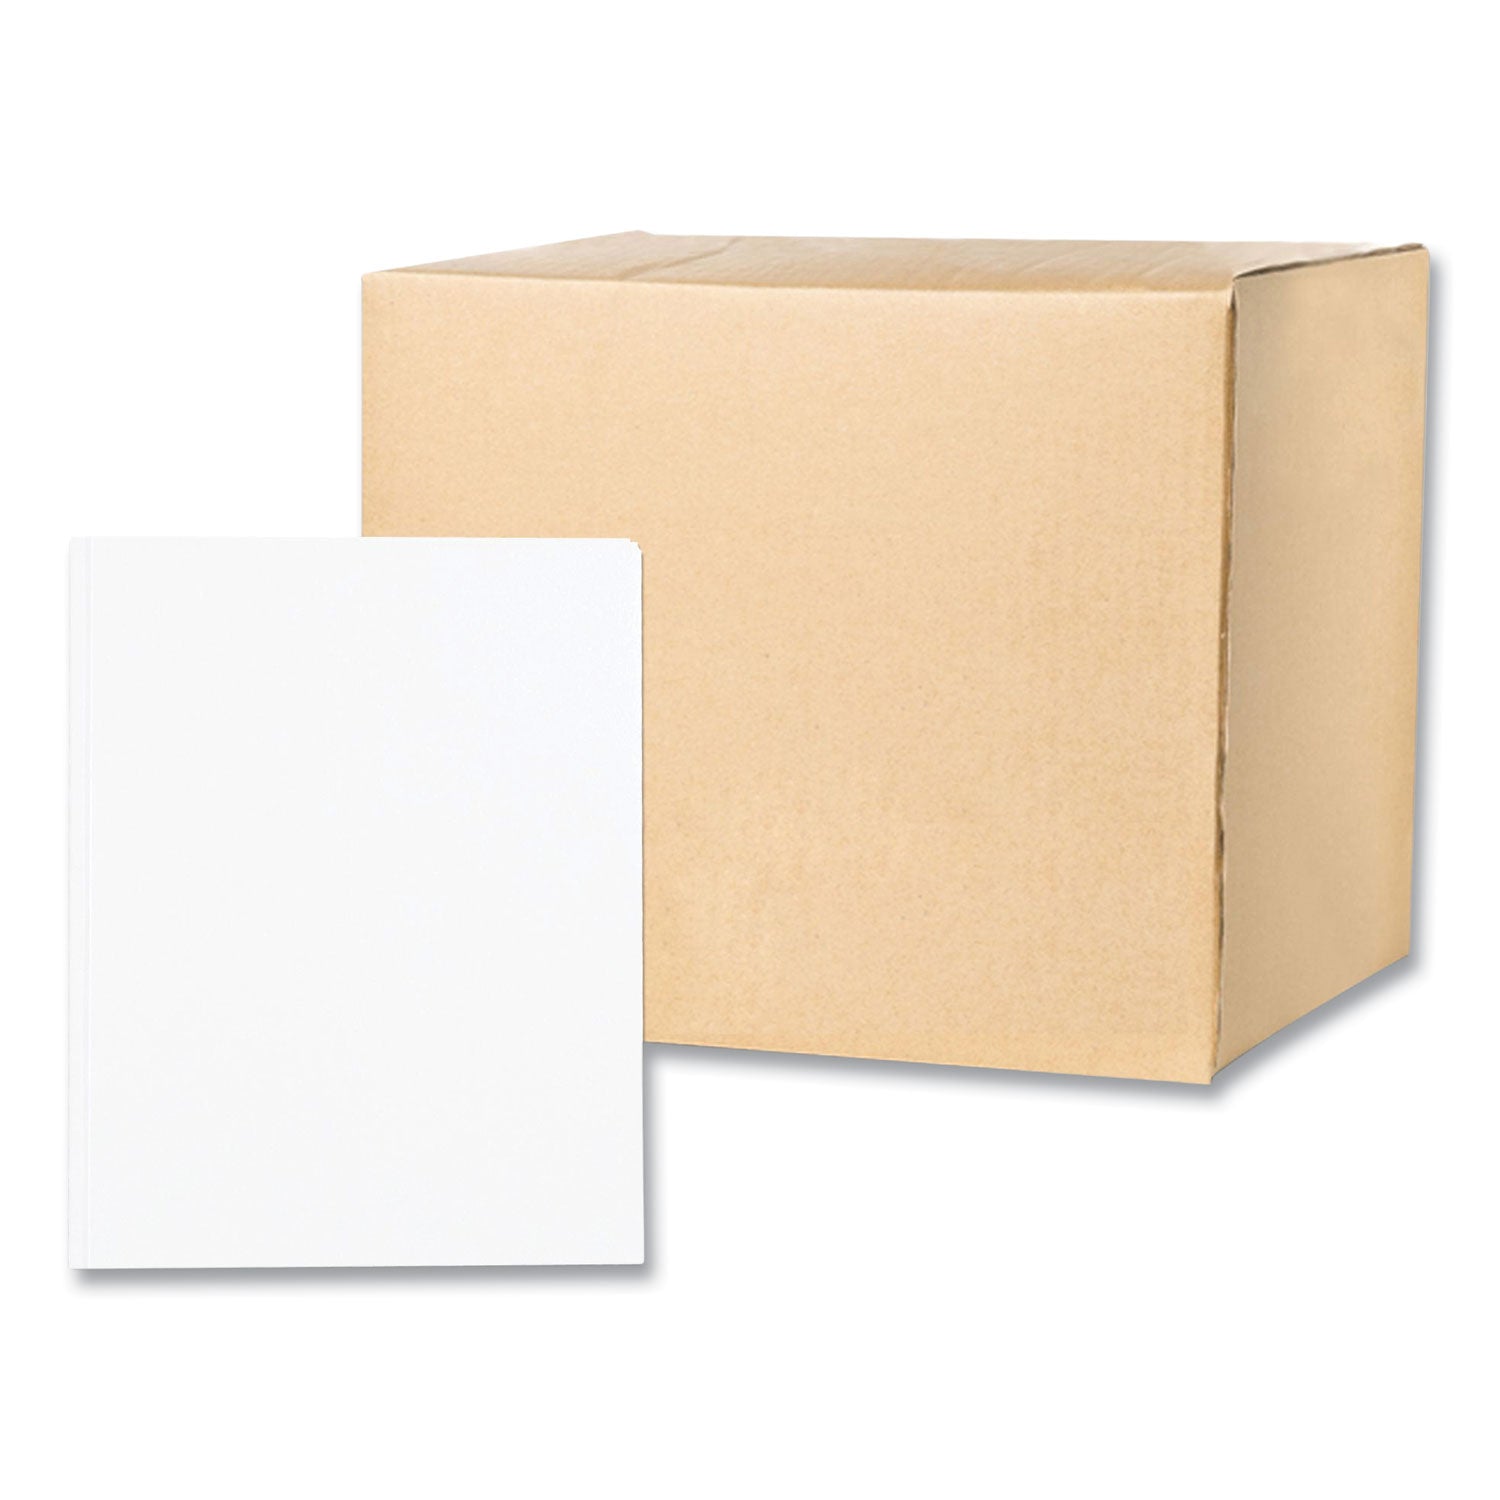 pocket-folder-with-3-fasteners-05-capacity-11-x-85-white-25-box-10-boxes-carton-ships-in-4-6-business-days_roa54122cs - 1